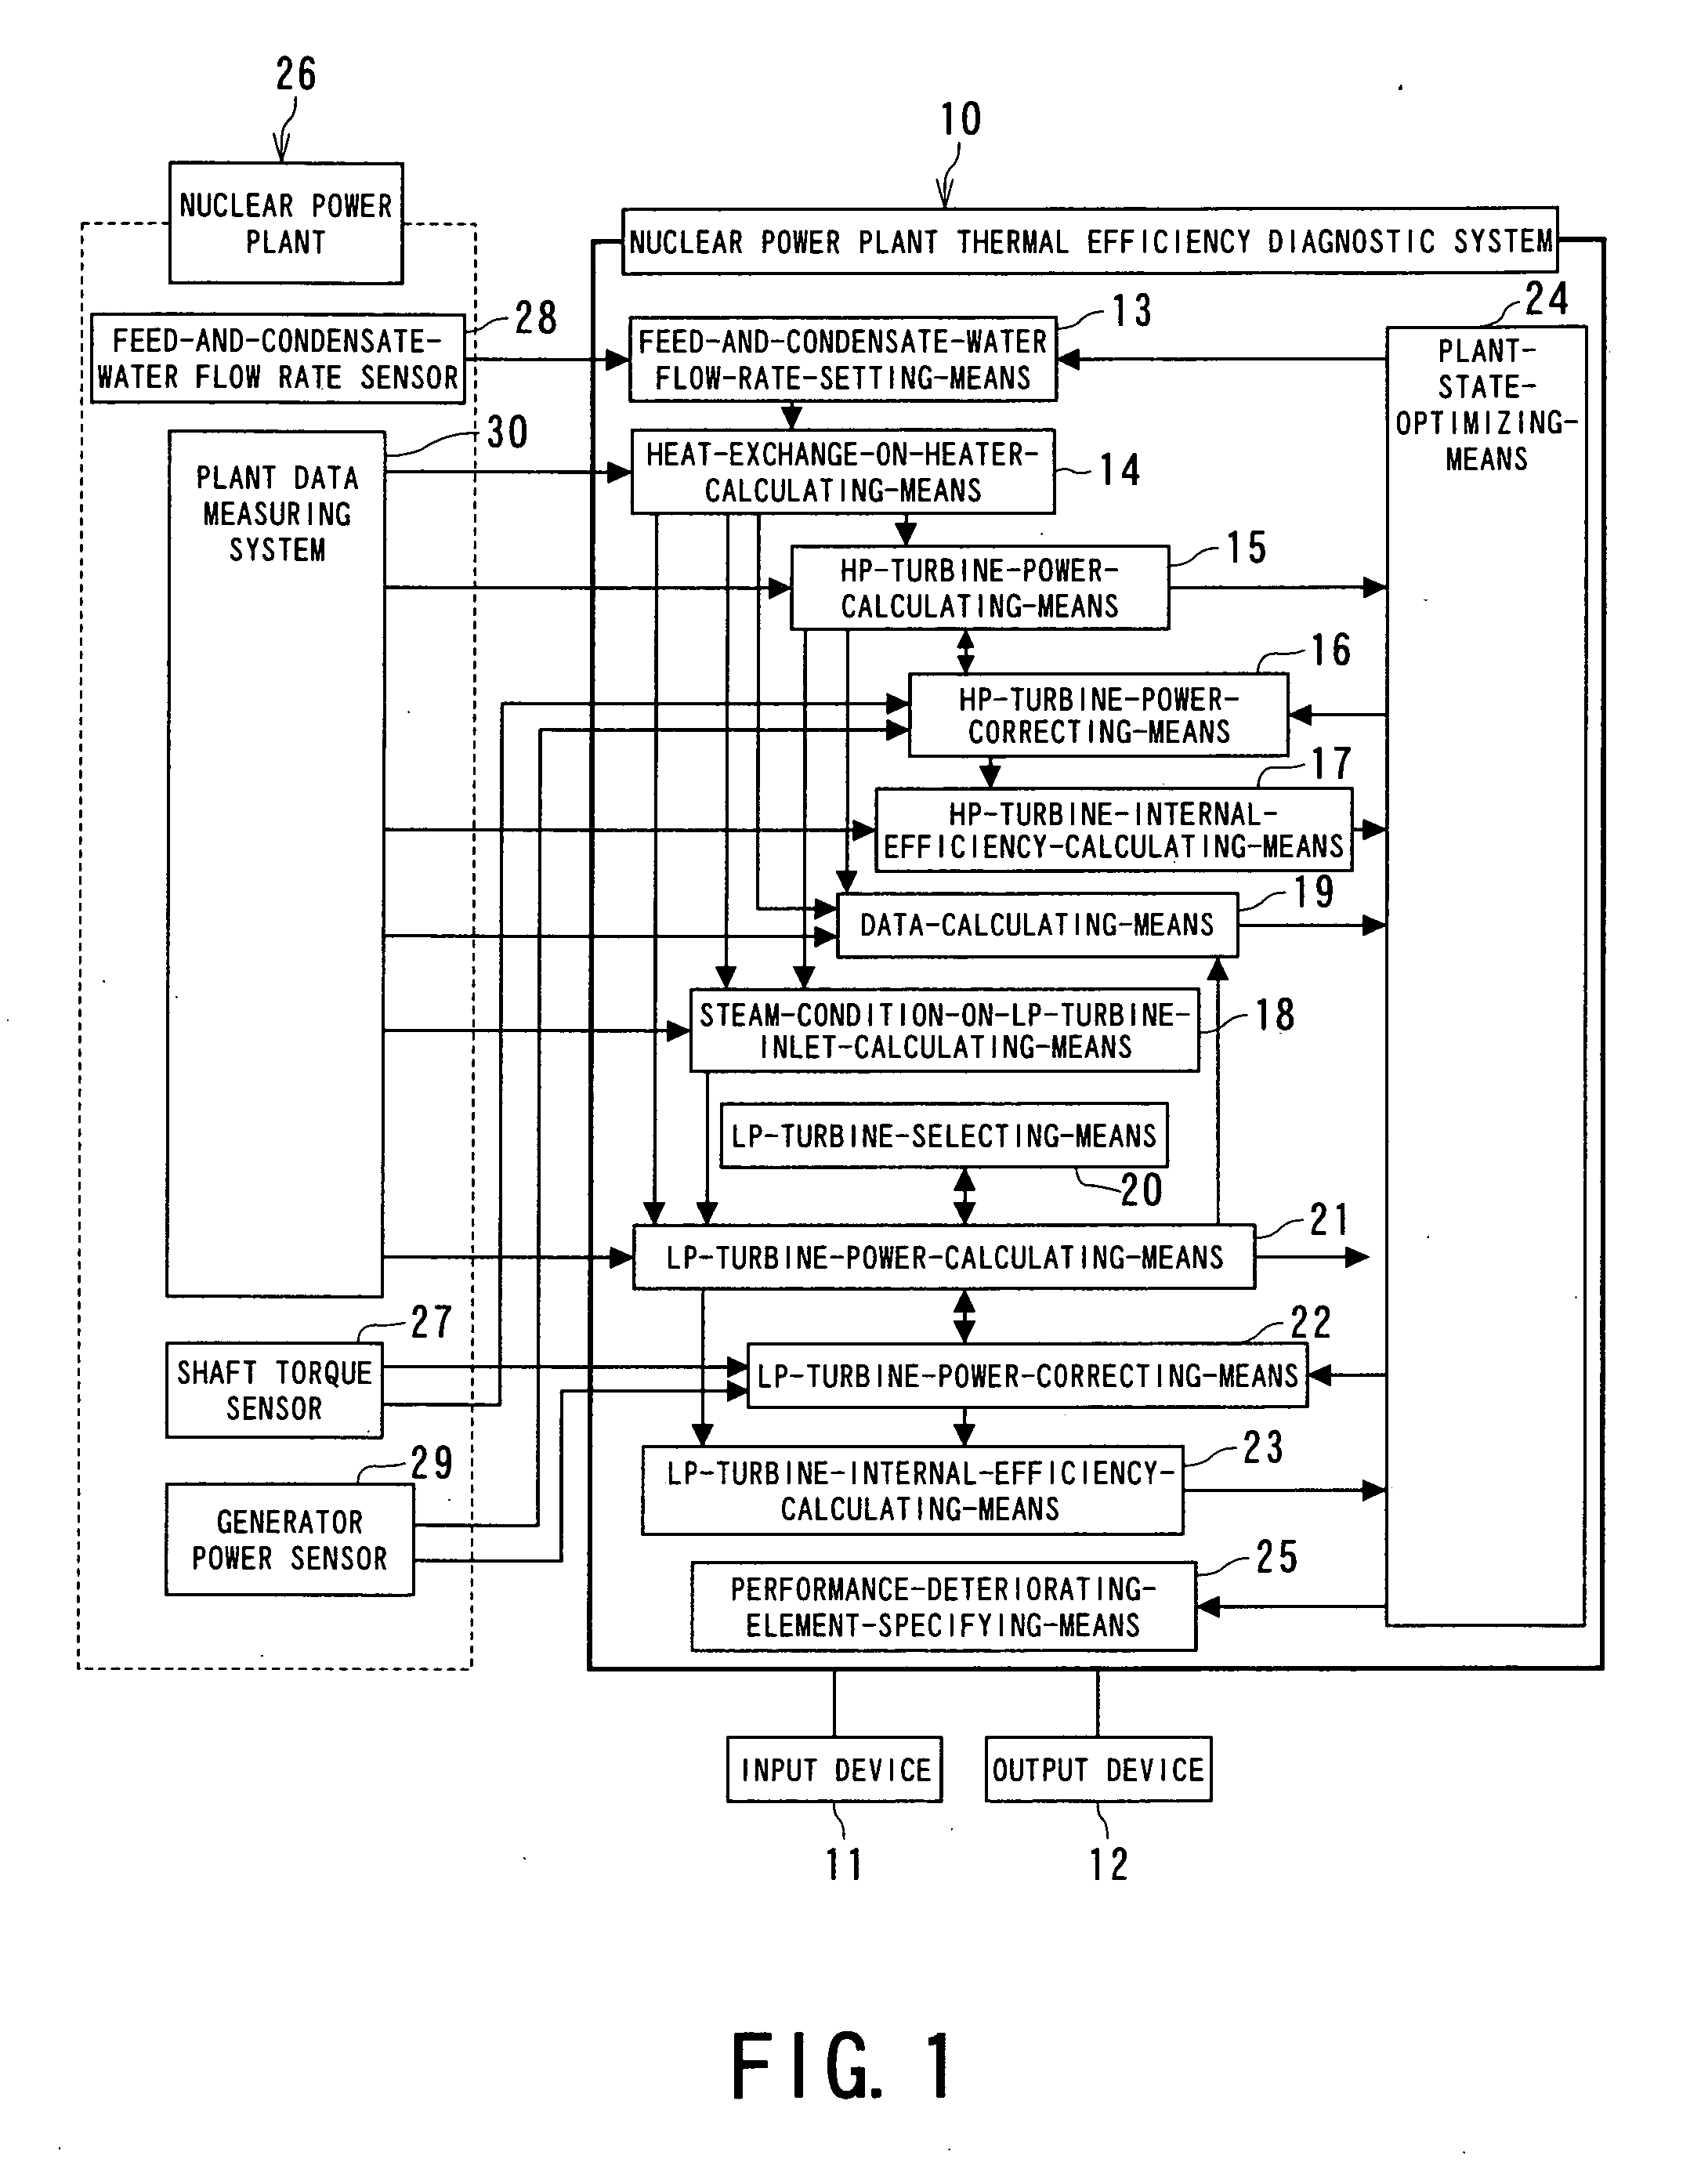 Thermal efficiency diagnosing system for nuclear power plant, thermal efficiency diagnosing program for nuclear power plant, and thermal efficiency diagnosing method for nuclear power plant